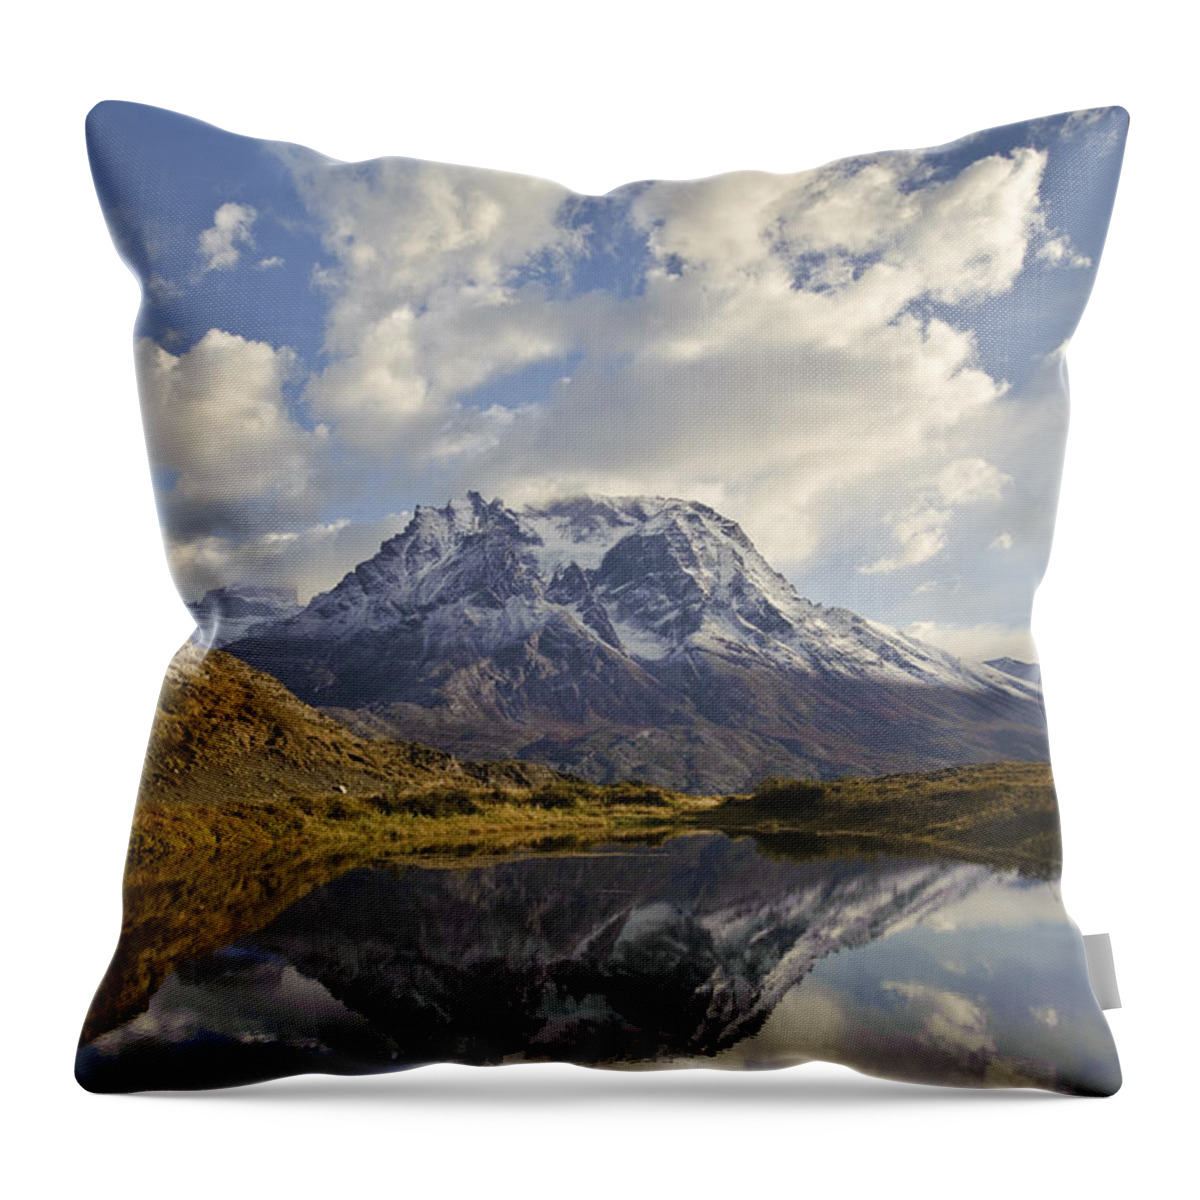 Chile Throw Pillow featuring the photograph Reflection Of Mt Almirante Nieto, Chile by John Shaw